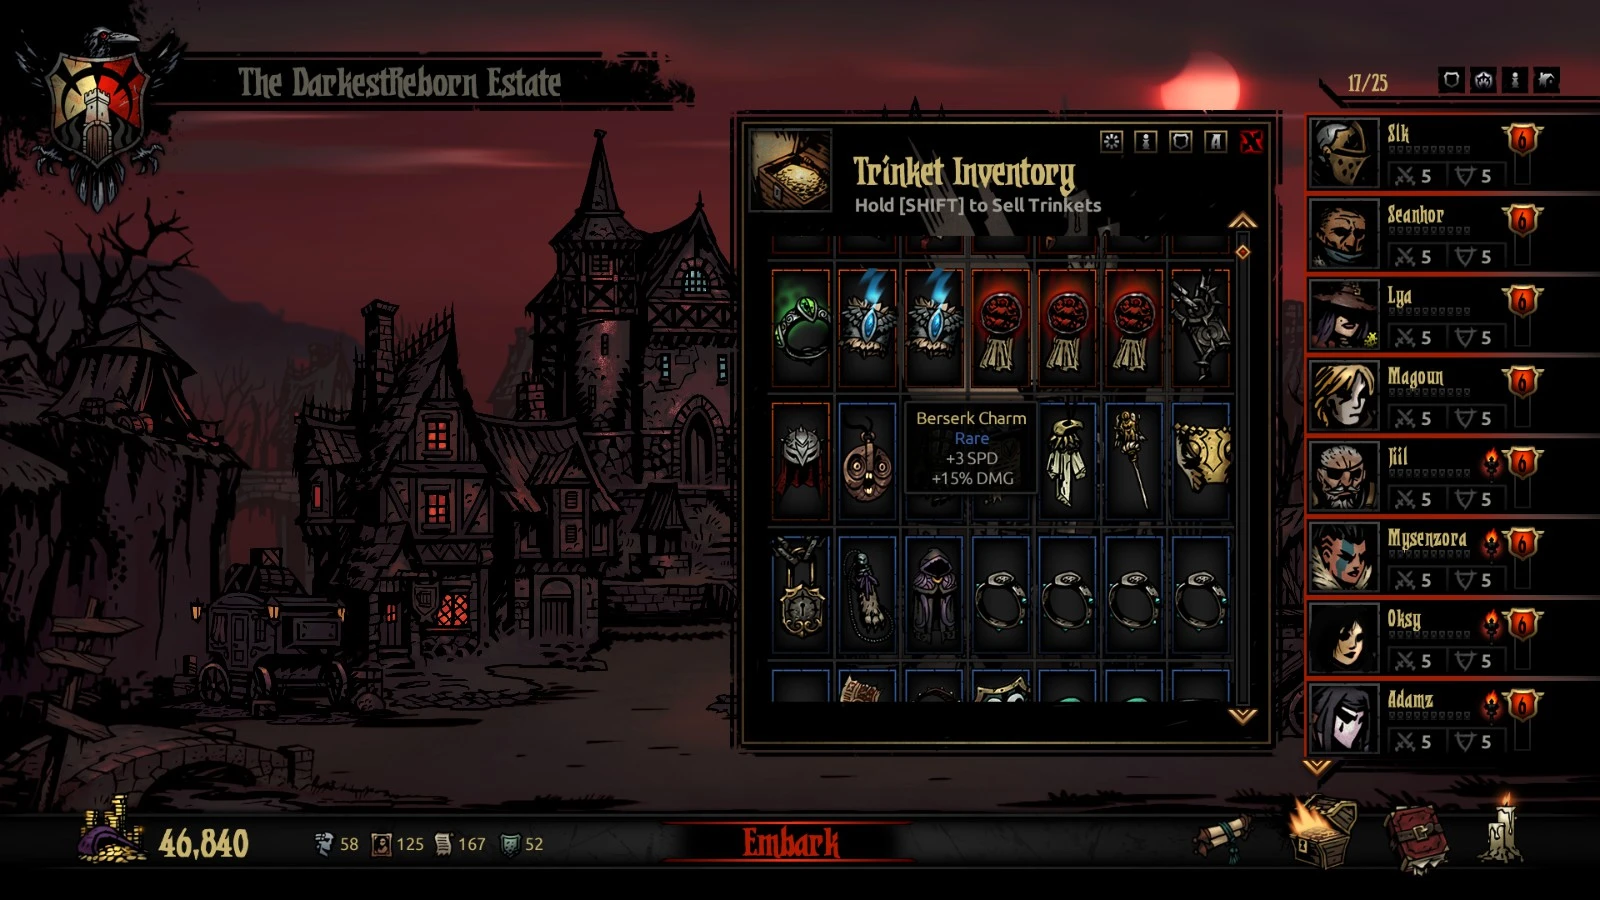 darkest dungeon color of madness trinkets